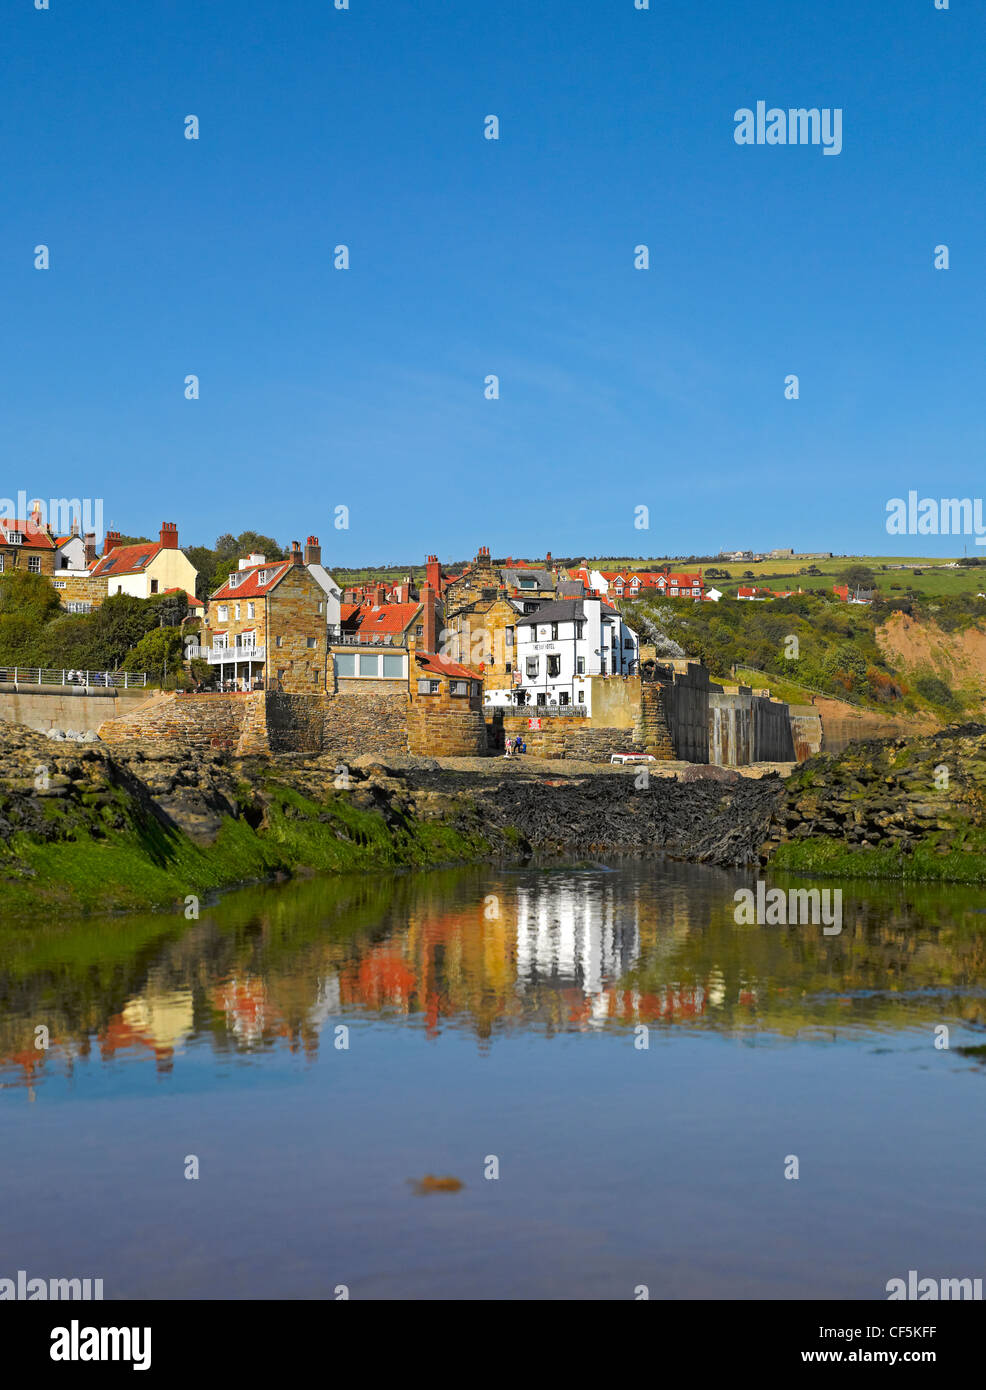 Reflections in a pool of water on the beach at Robin Hoods Bay, the busiest smuggling community on the Yorkshire coast during th Stock Photo